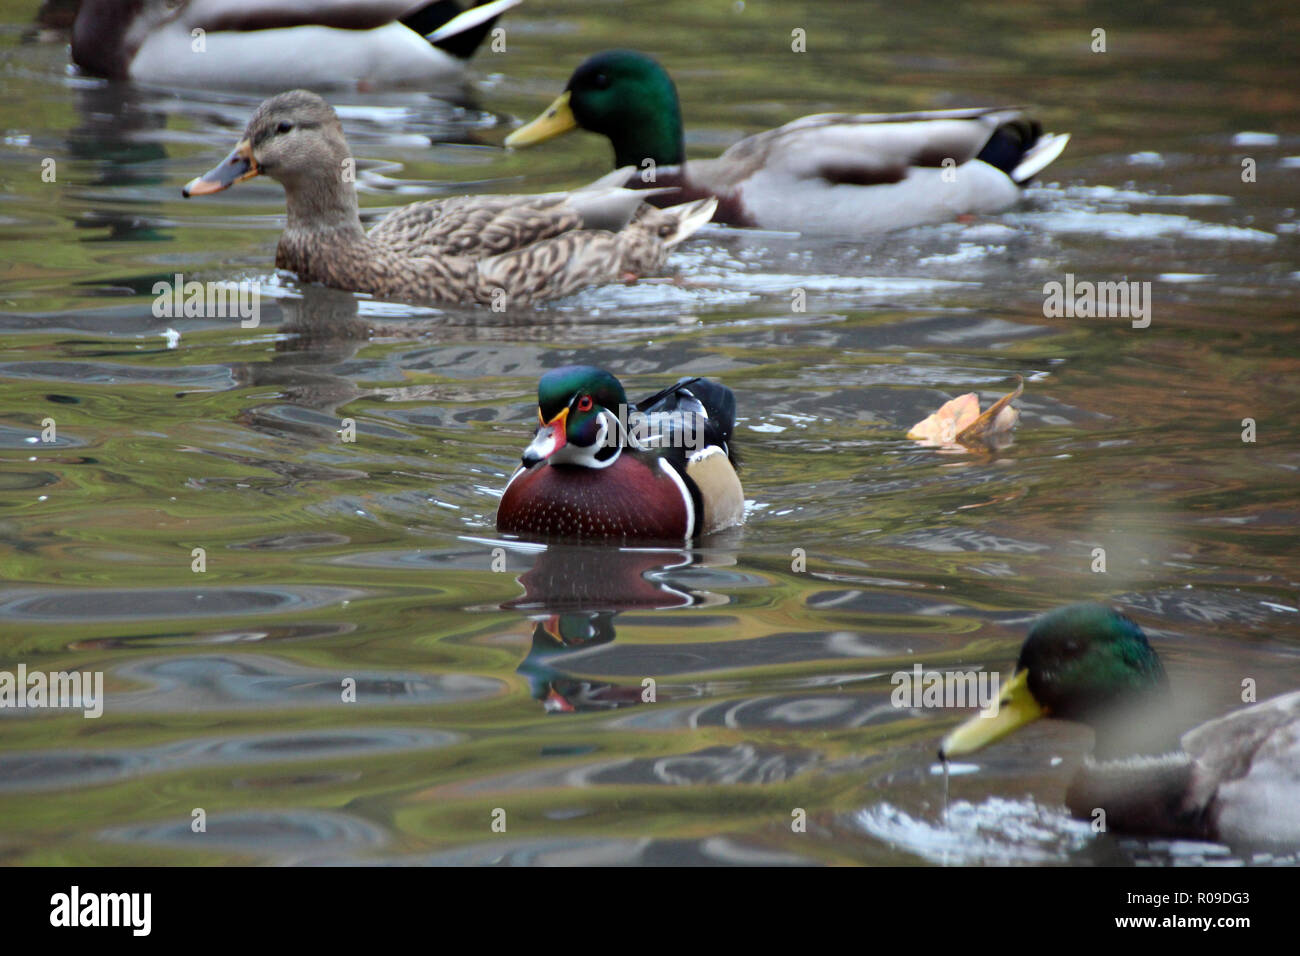 New York, USA. 02nd Nov, 2018. A mandarin duck swims among mallards on a pond in Central Park. A colorful mandarin duck had appeared there some days ago and had mixed itself among the far less colorful mallard ducks resident there. Mandarin clients are actually located in Asia. Where this specimen came from was initially unclear. (to dpa ''New York's most coveted bachelor': Metropolis puzzles about a duck' from 03.11.2018) Credit: Christina Horsten/dpa/Alamy Live News Stock Photo